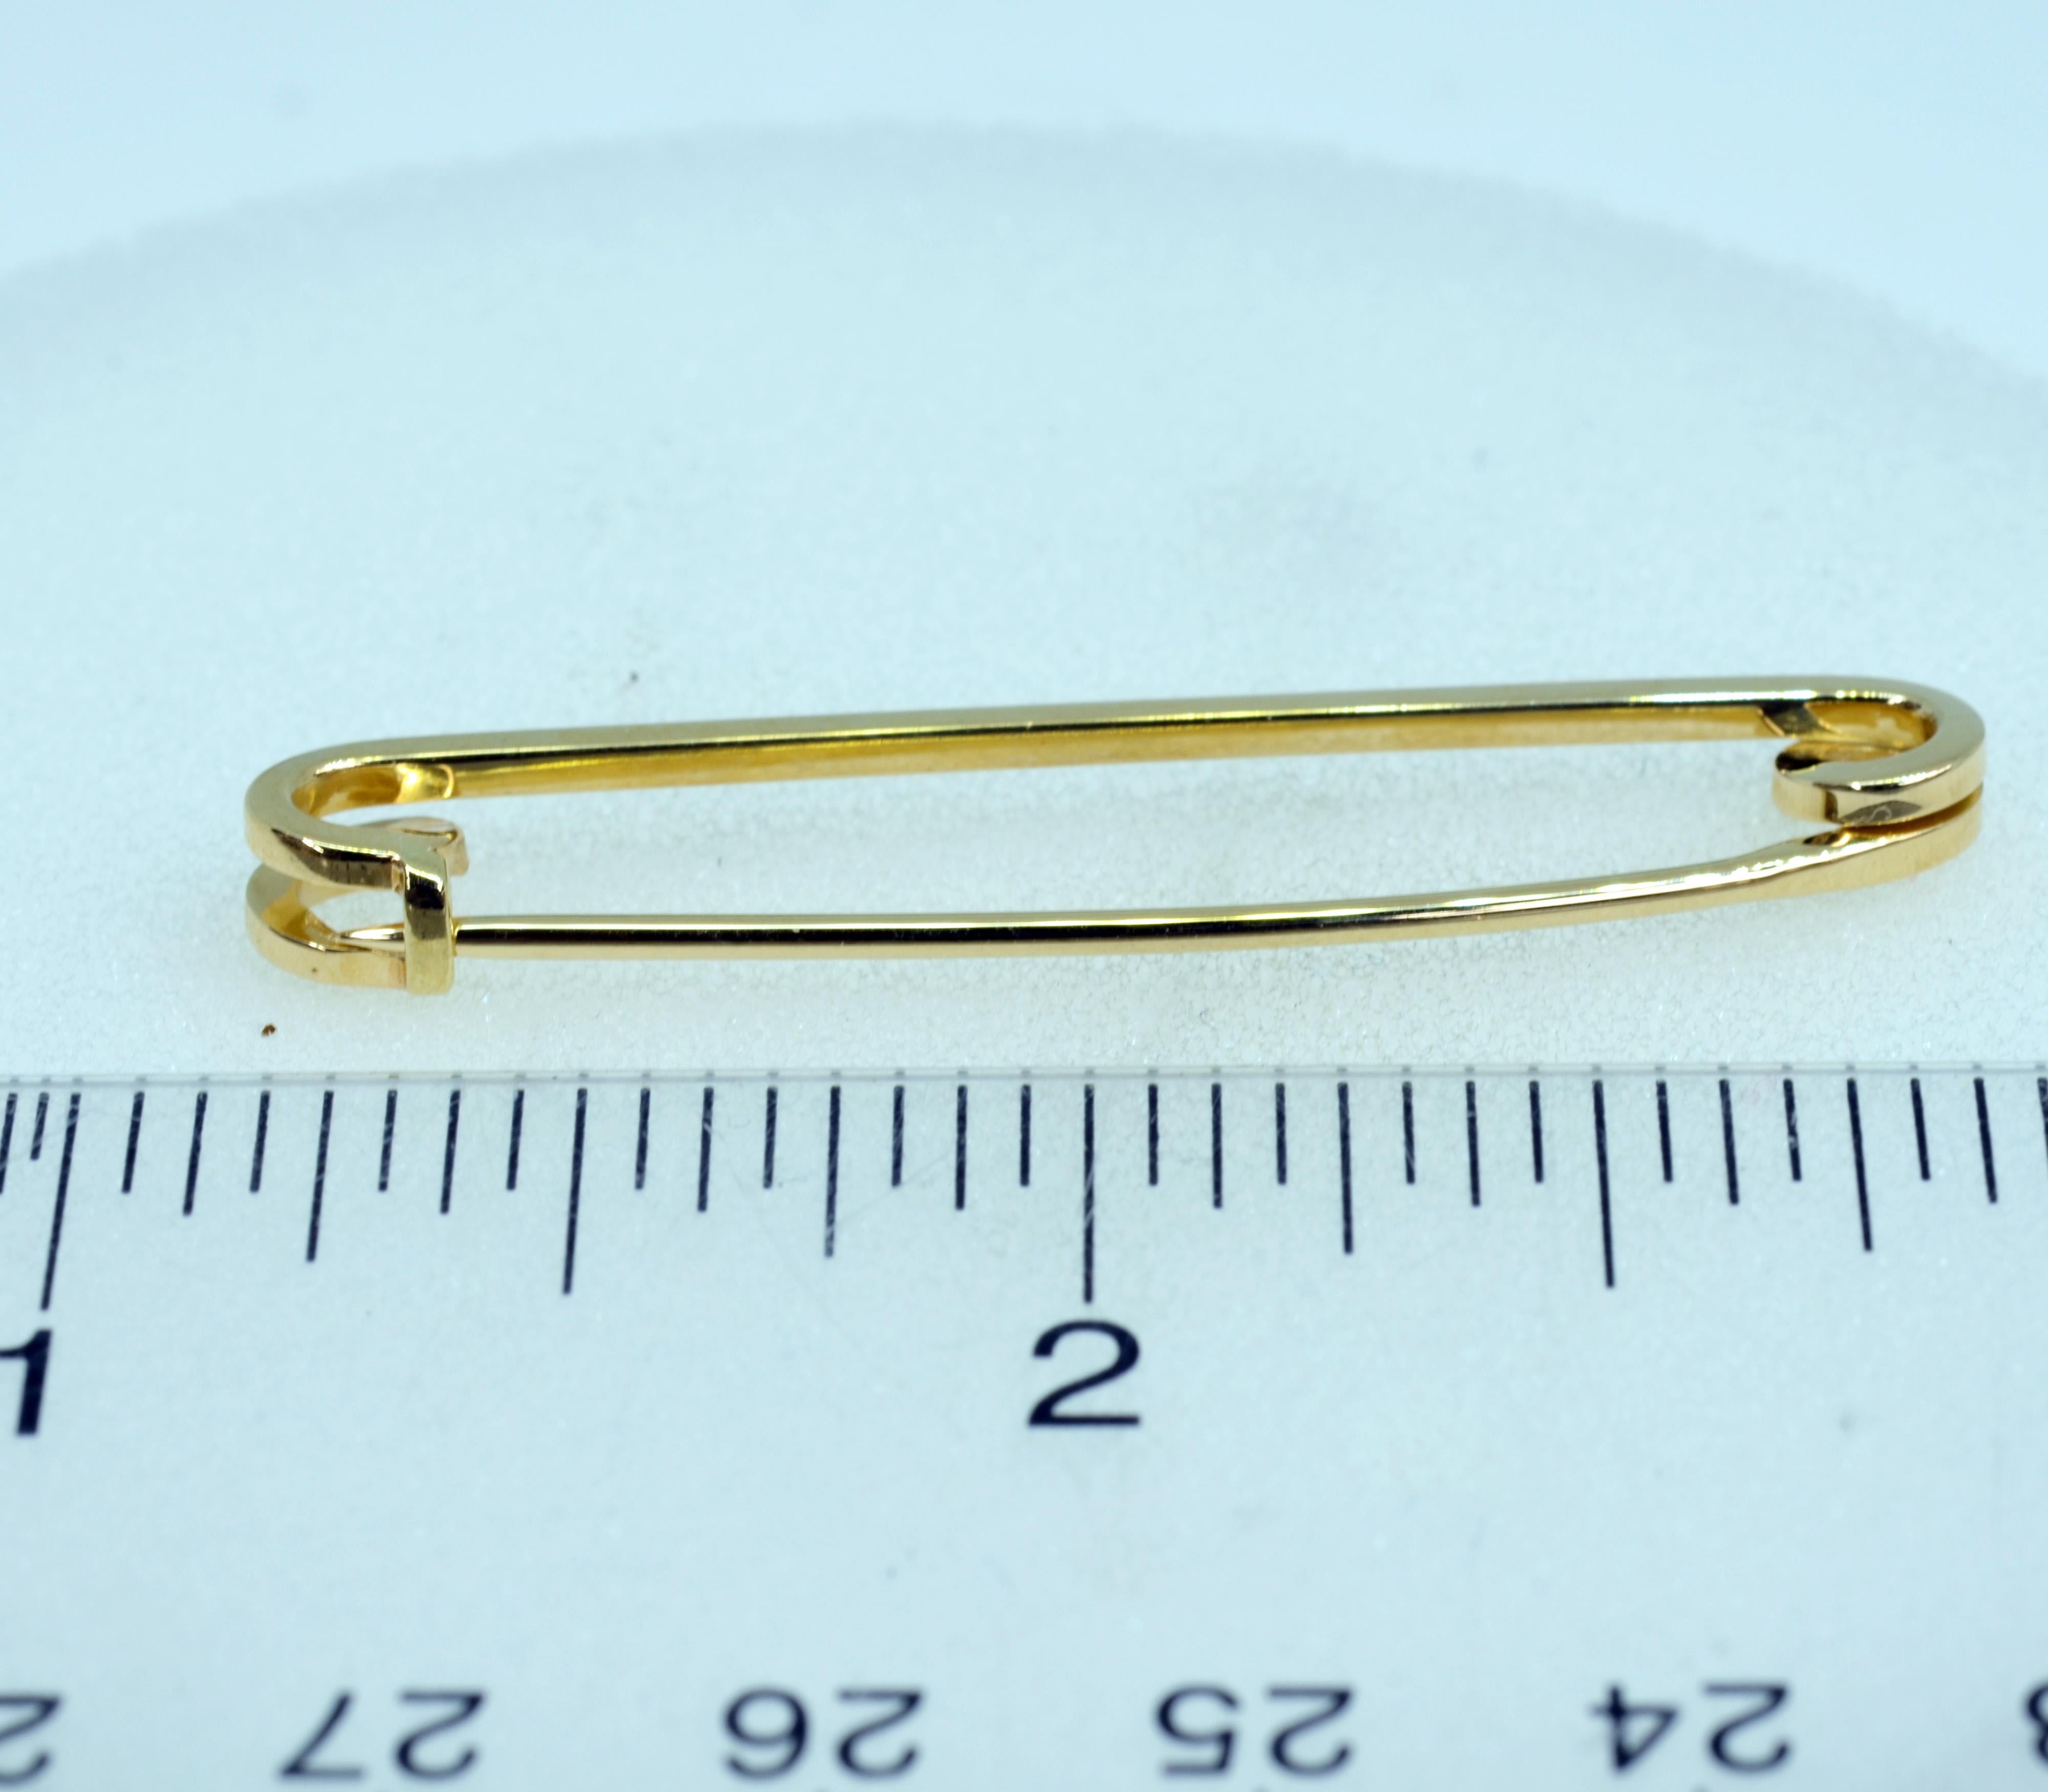 Classic Tiffany safety pin crafted in 14 Karat gold, perfect for a scarf or a lapel.. This pin is 1.8 inches (45.6mm) in length.